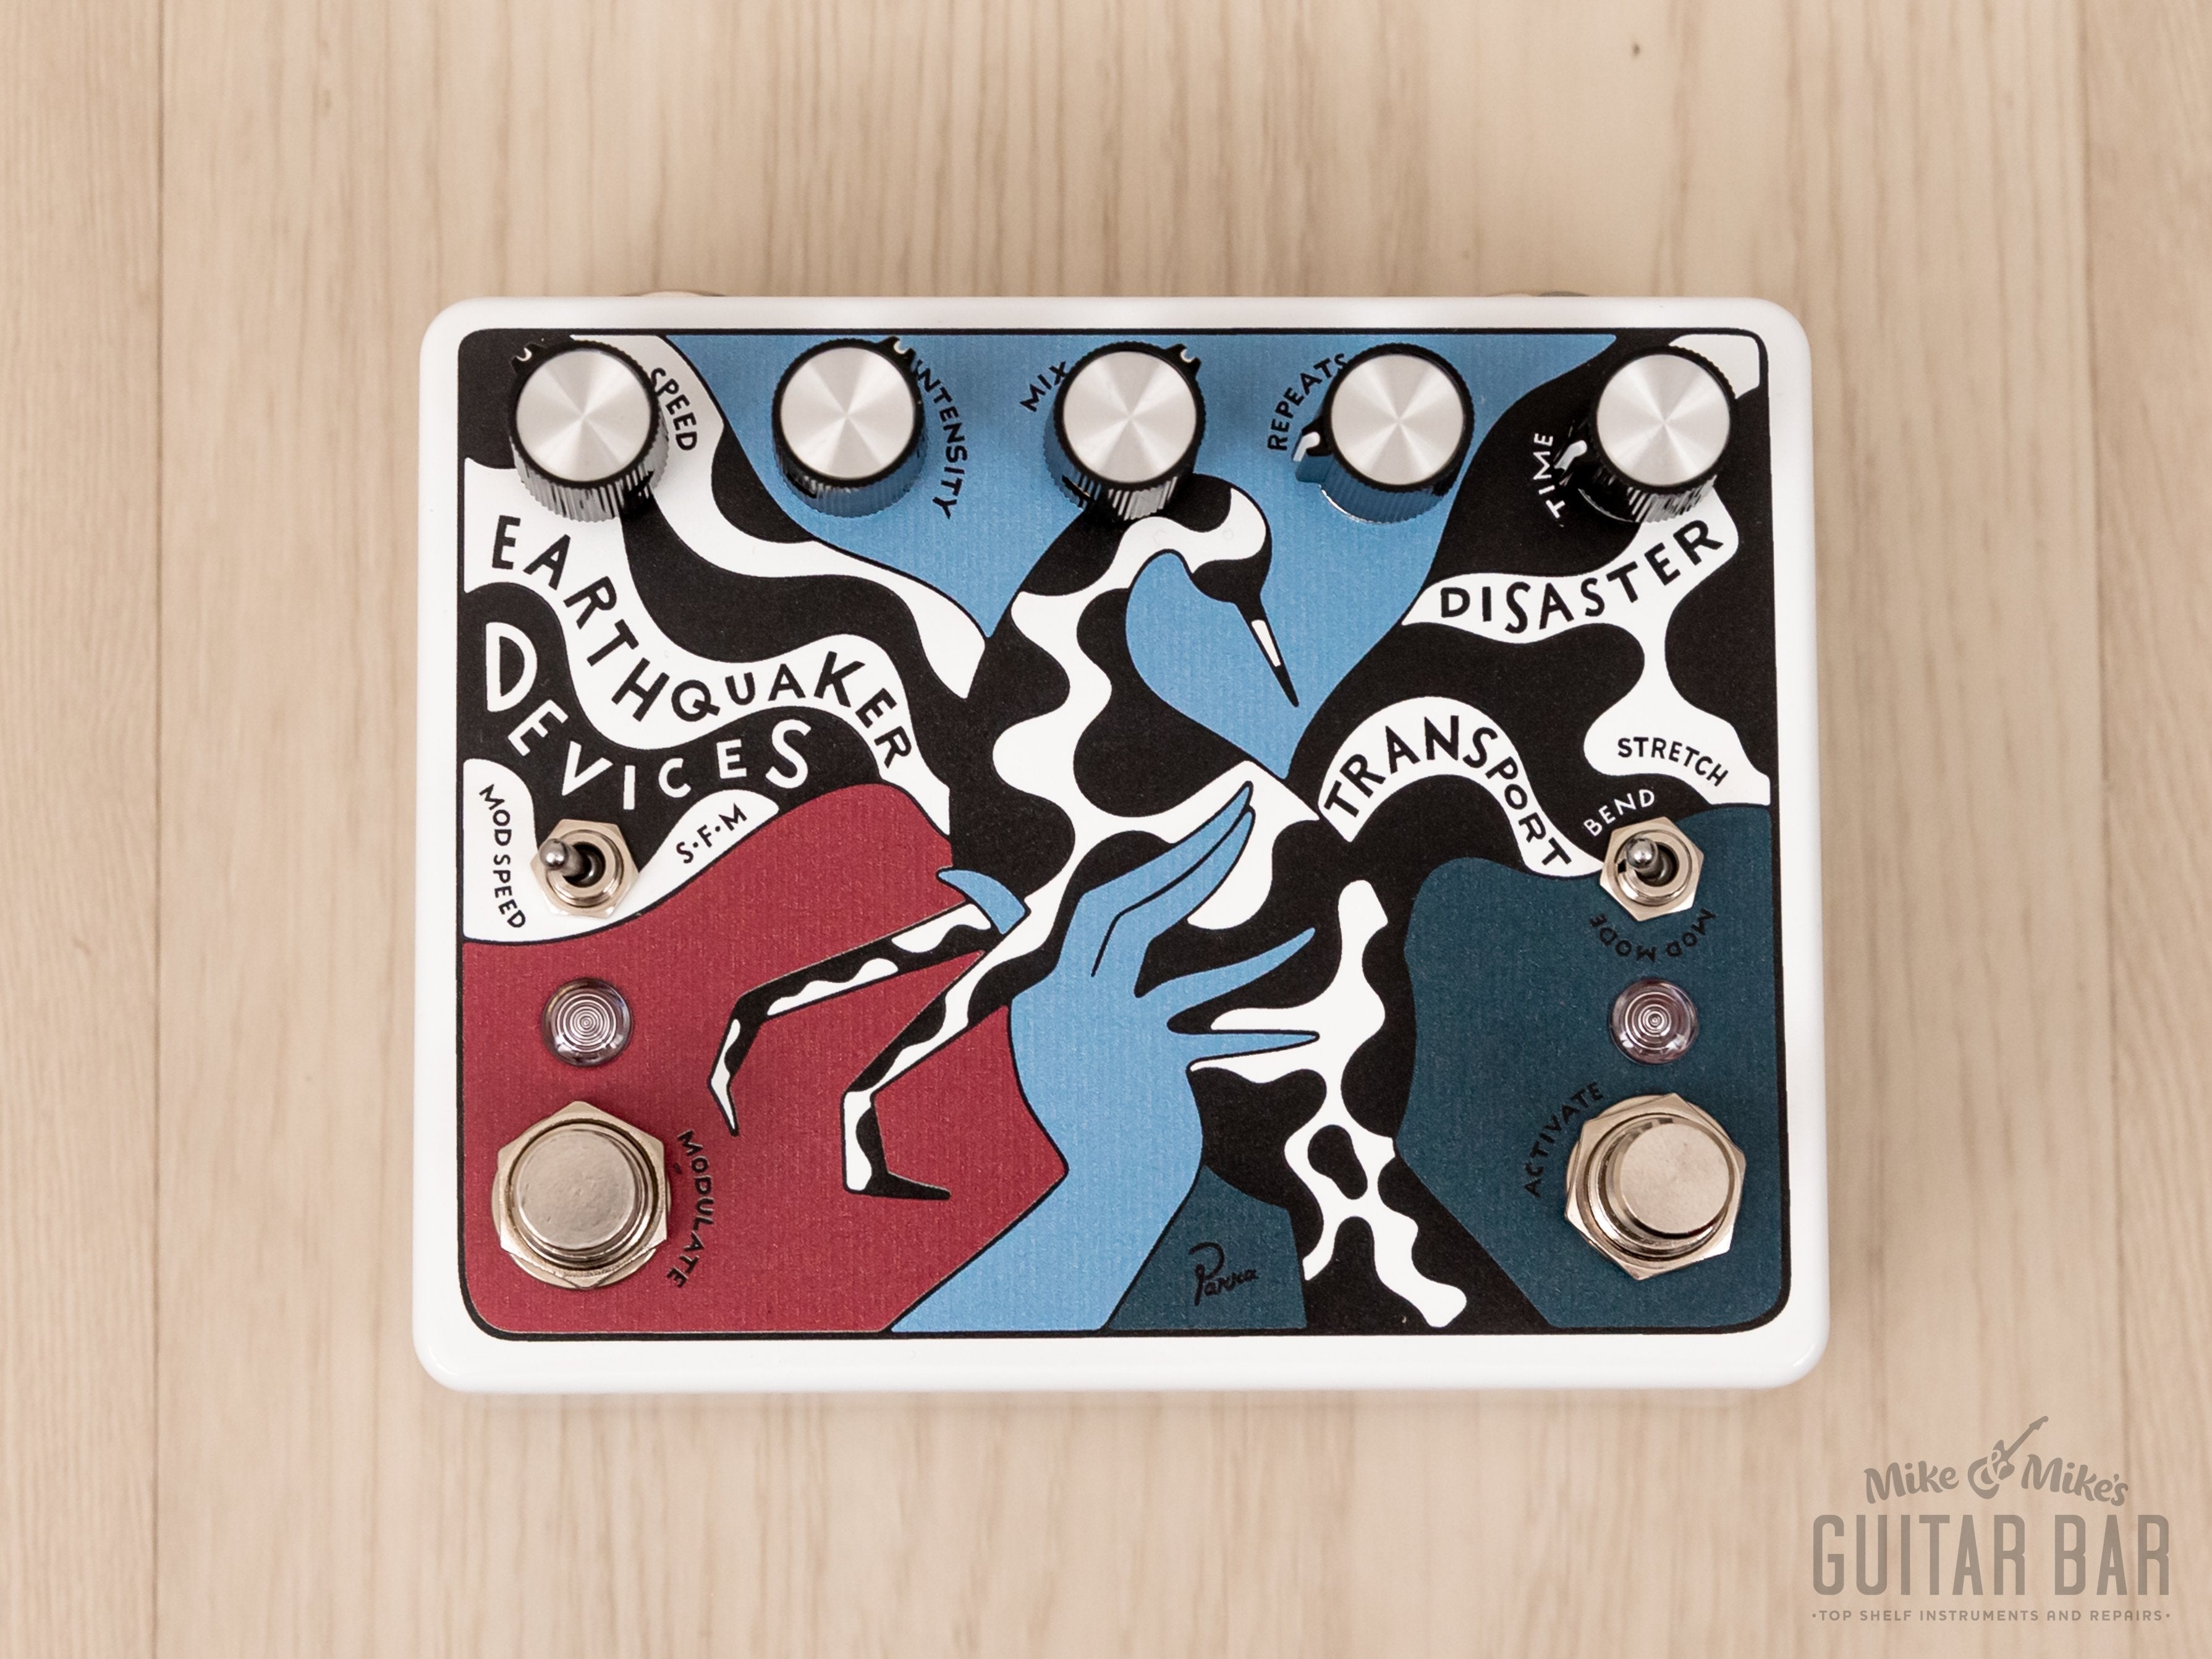 2023 EarthQuaker Devices Disaster Transport Parra Modulated Delay Machine Guitar Effects Pedal w/ Box